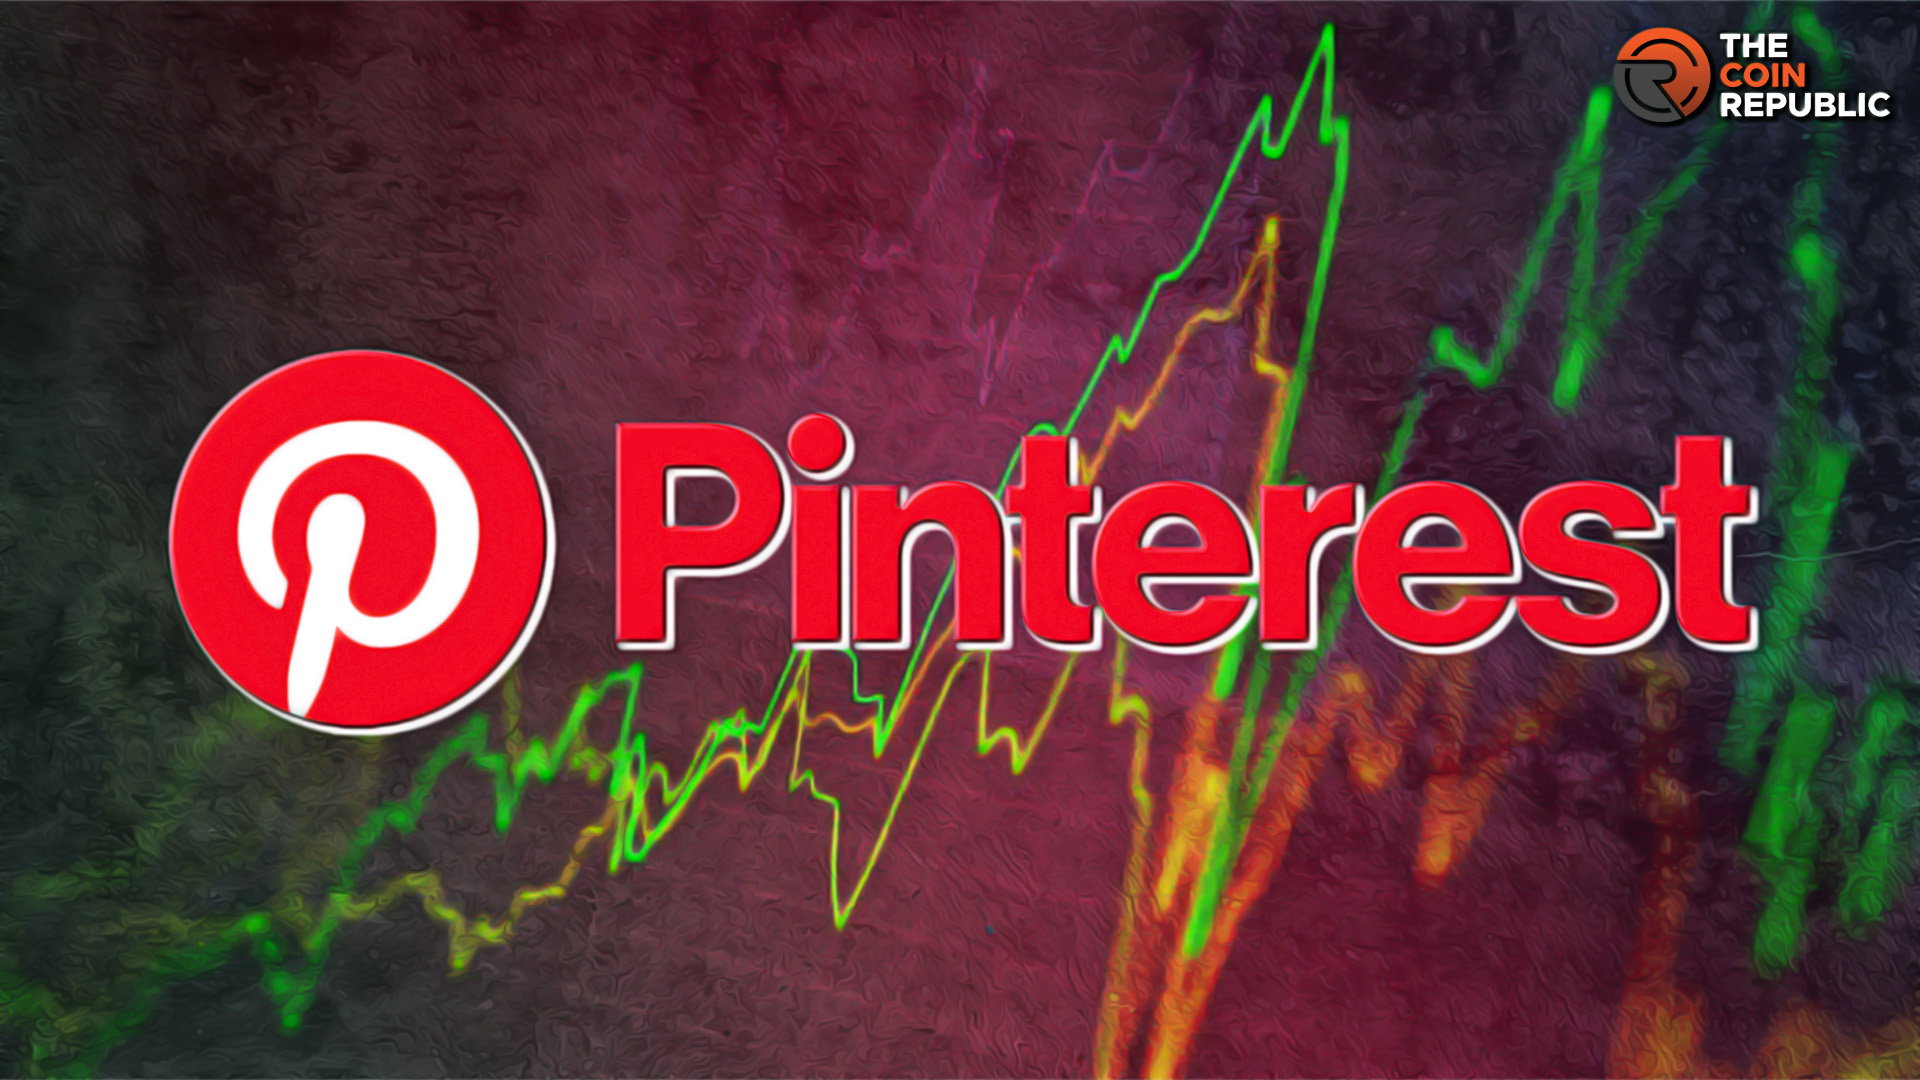 PINS Stock Price Has Potential To Reach $45, Suggests Analysts 